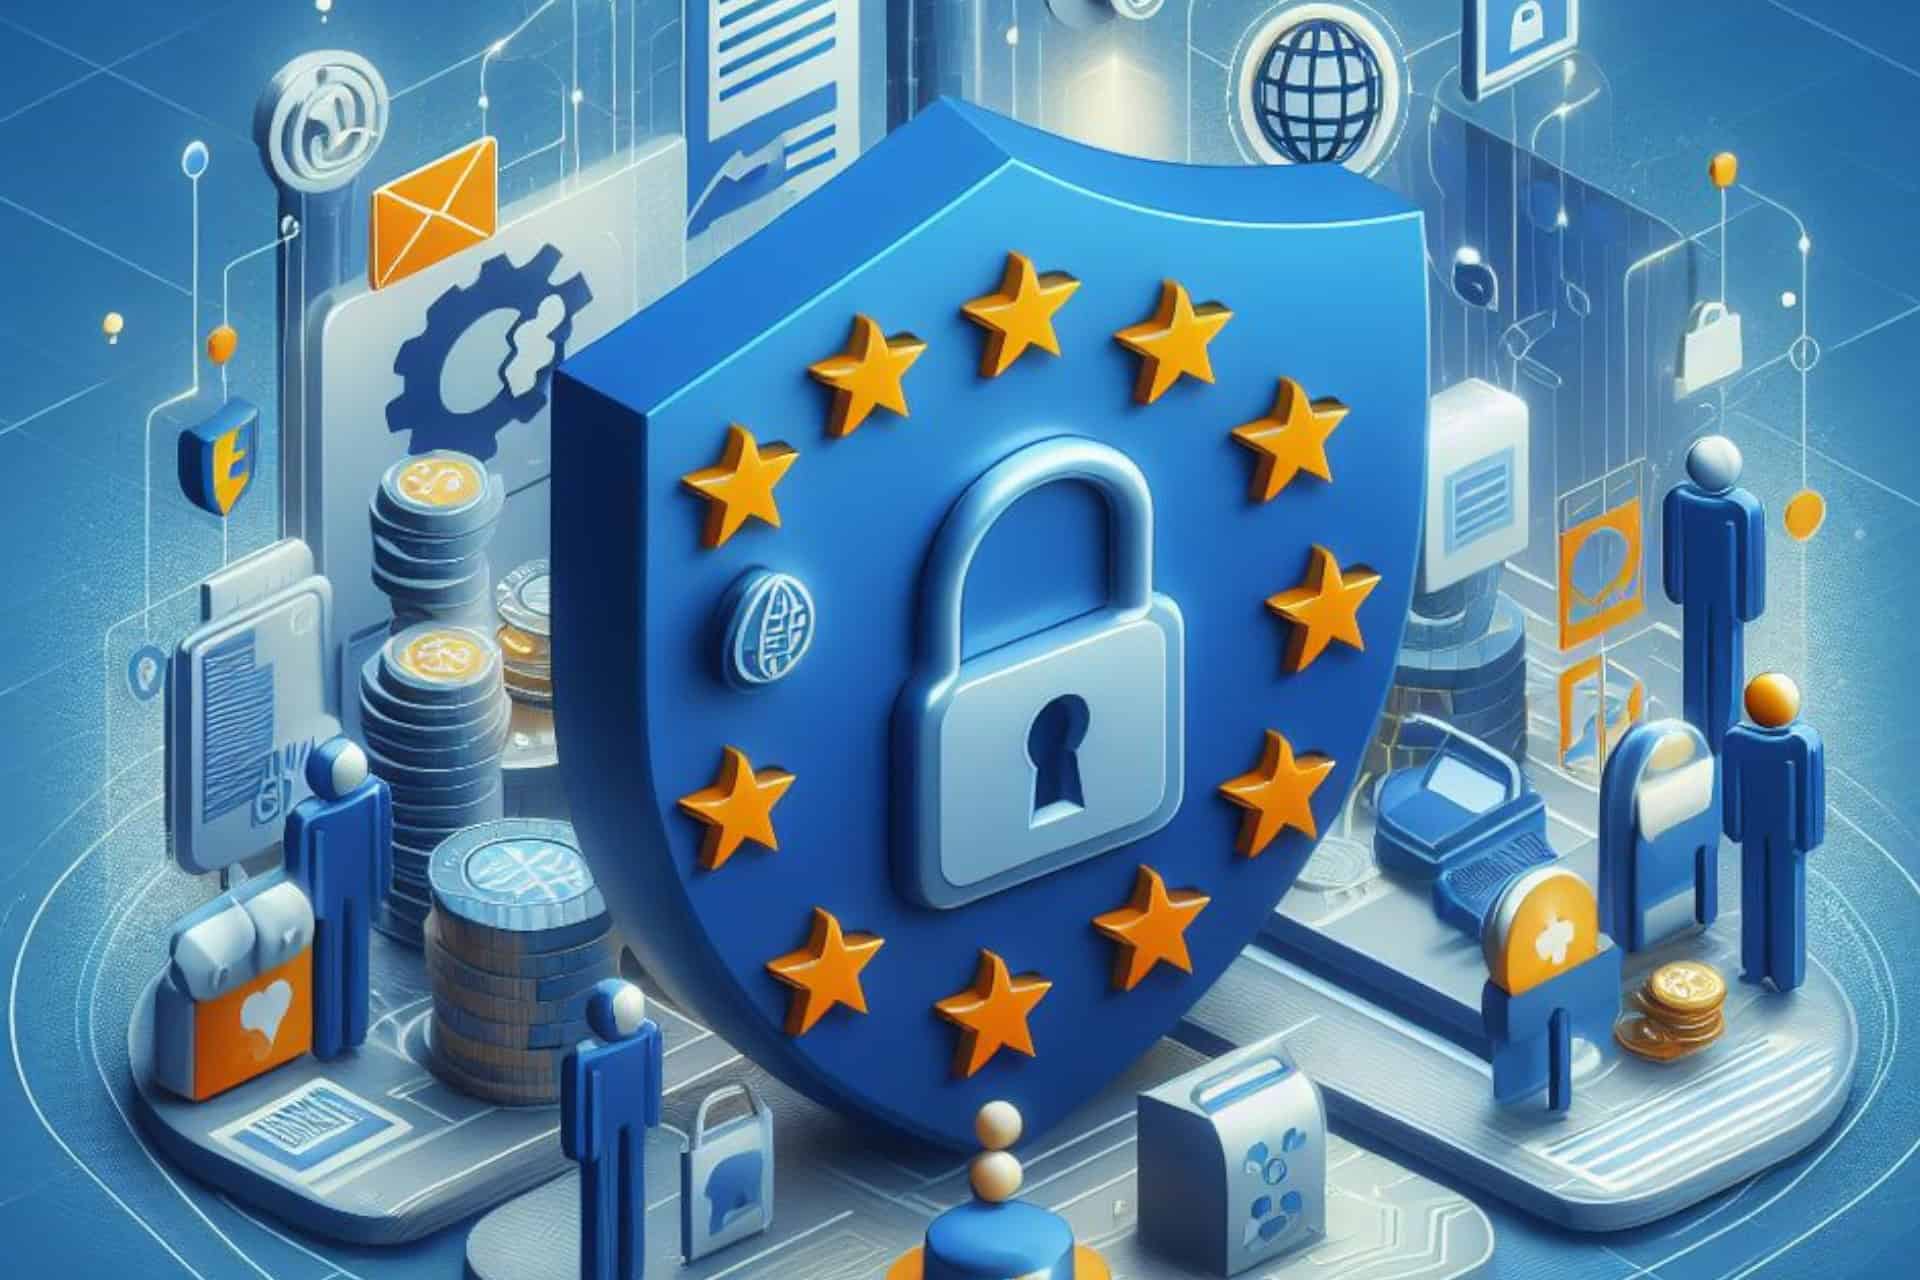 Europe's Response to Cross-Border Data Privacy Challenges